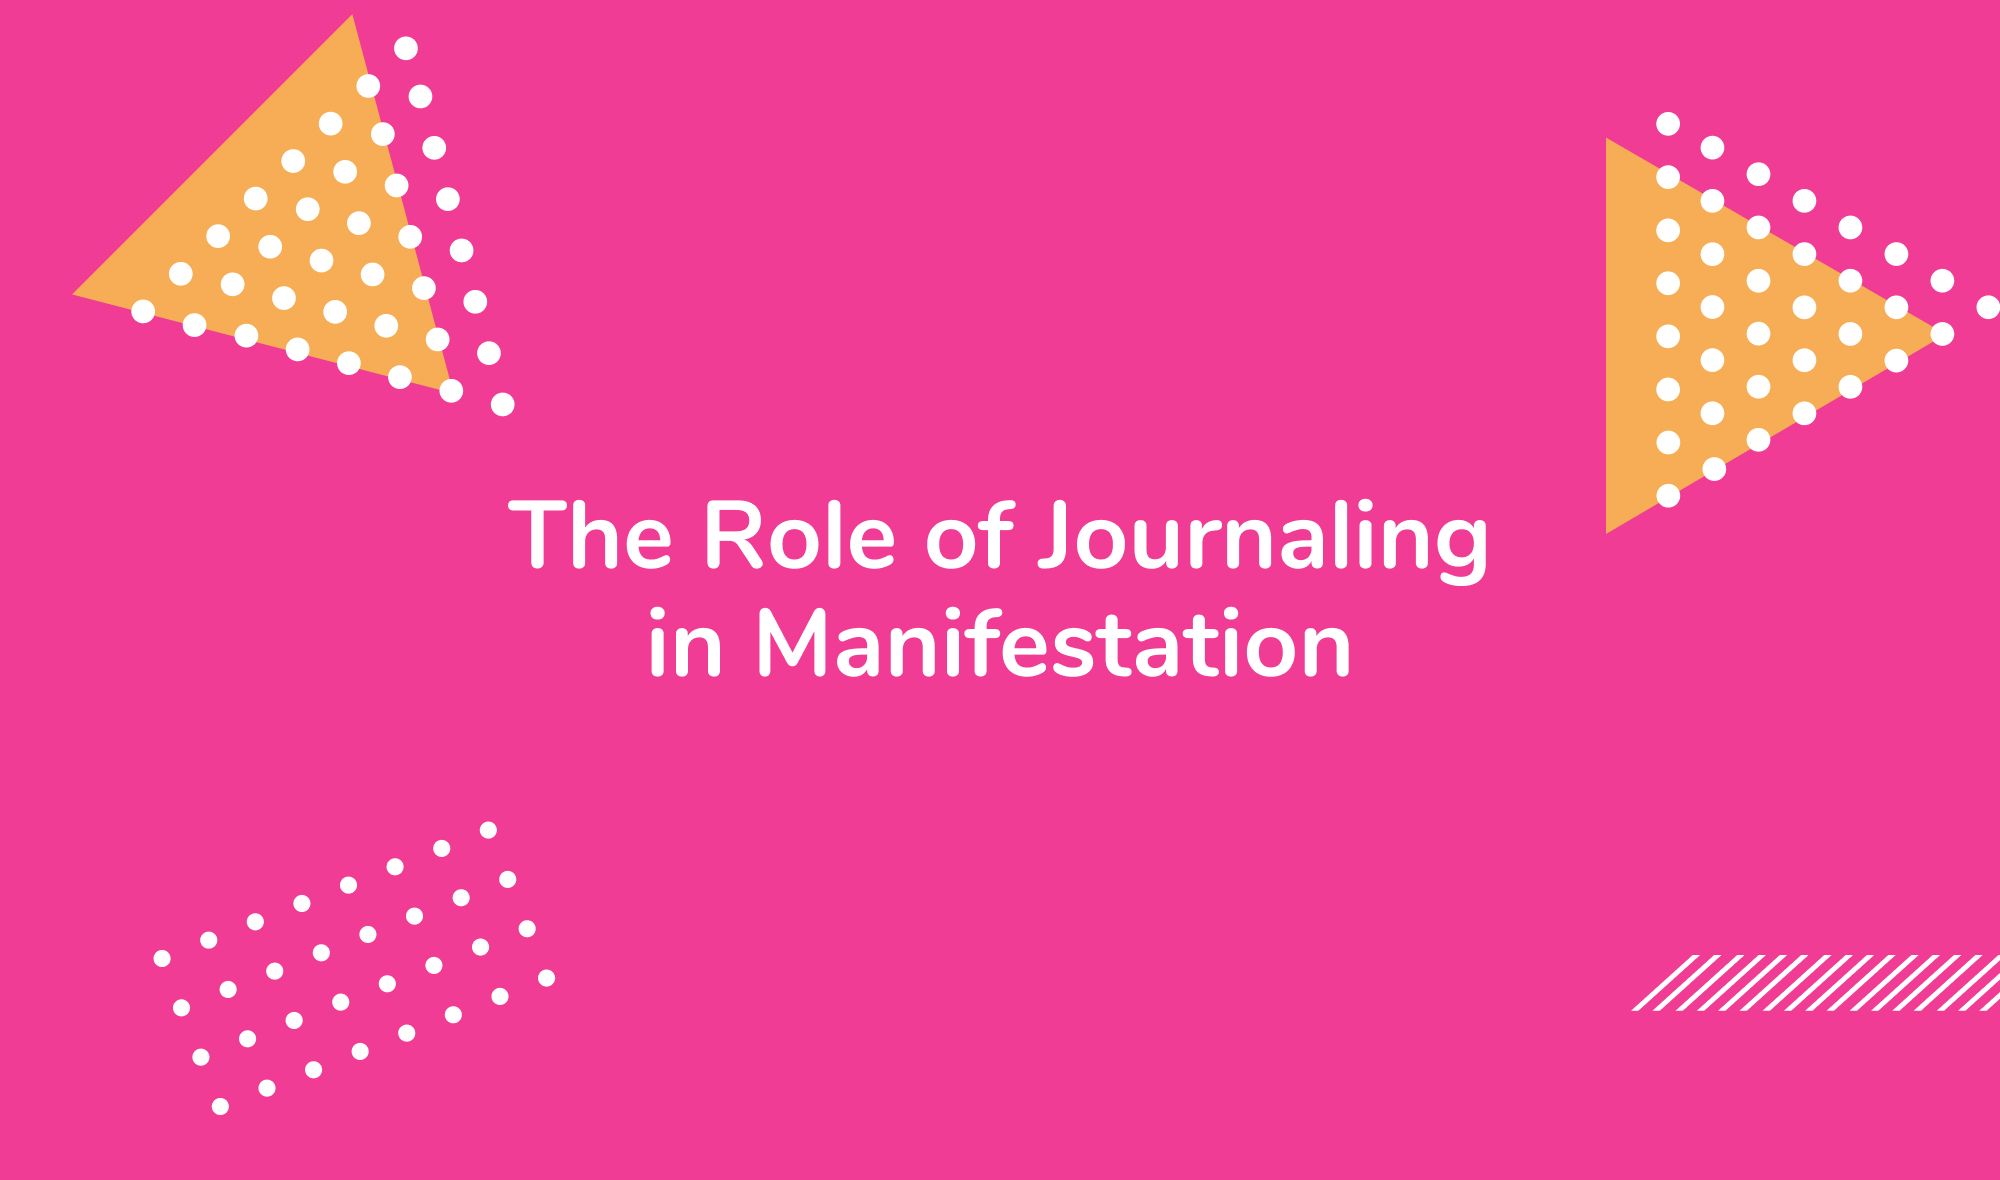 The Role of Journaling in Manifestation